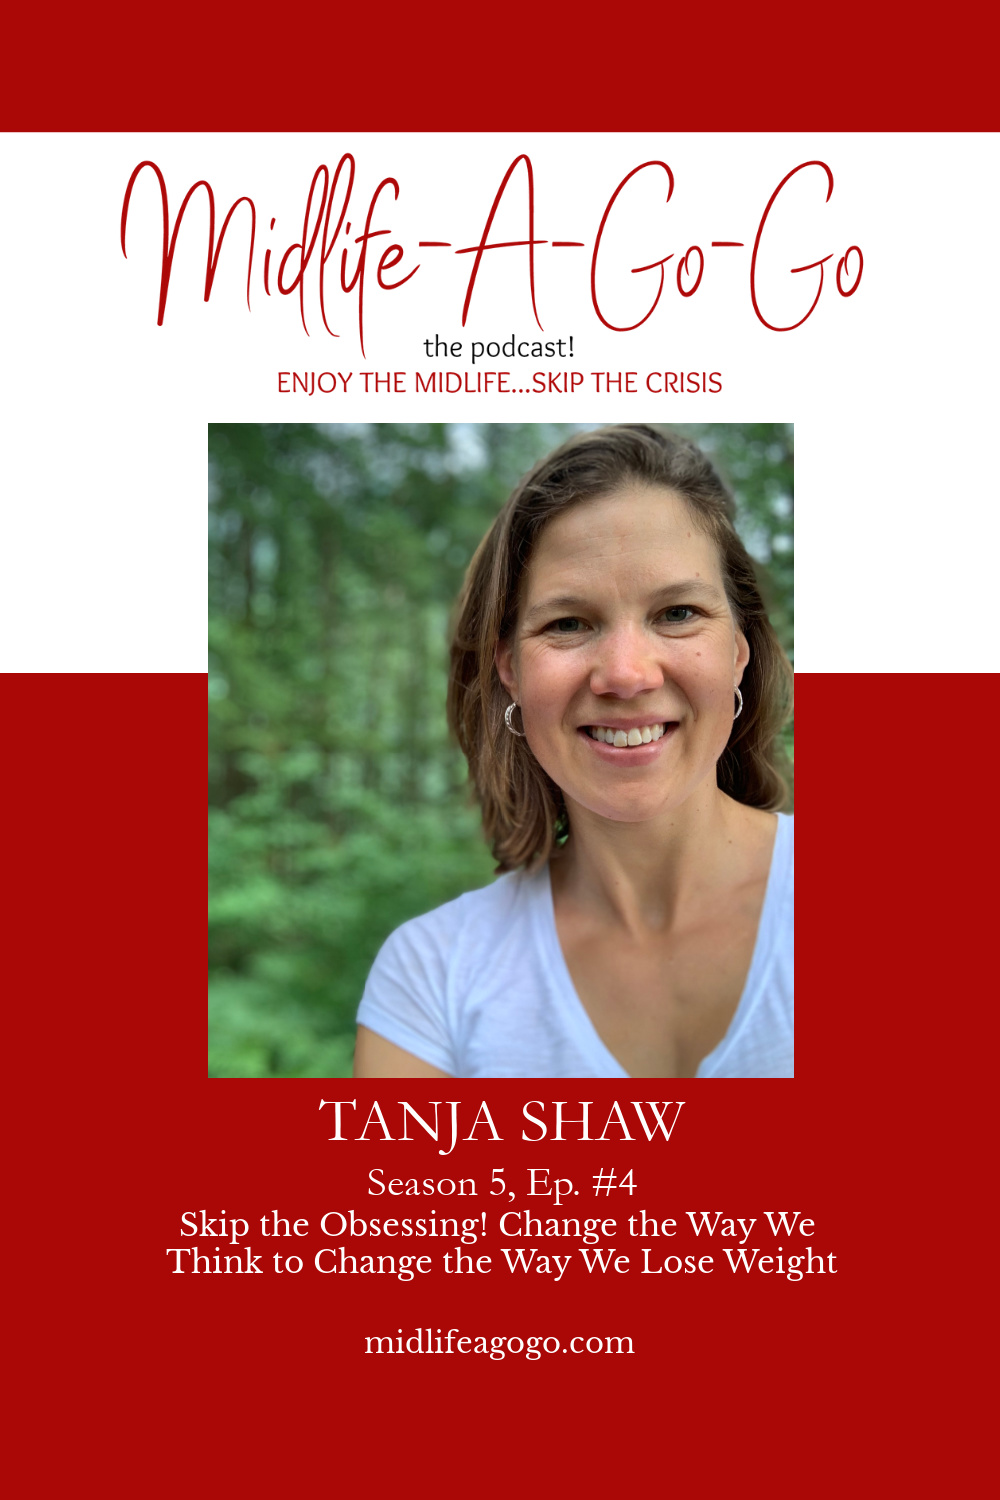 Skip the Obsessing! Change the Way We Think to Change the Way We Lose Weight with Tanja Shaw